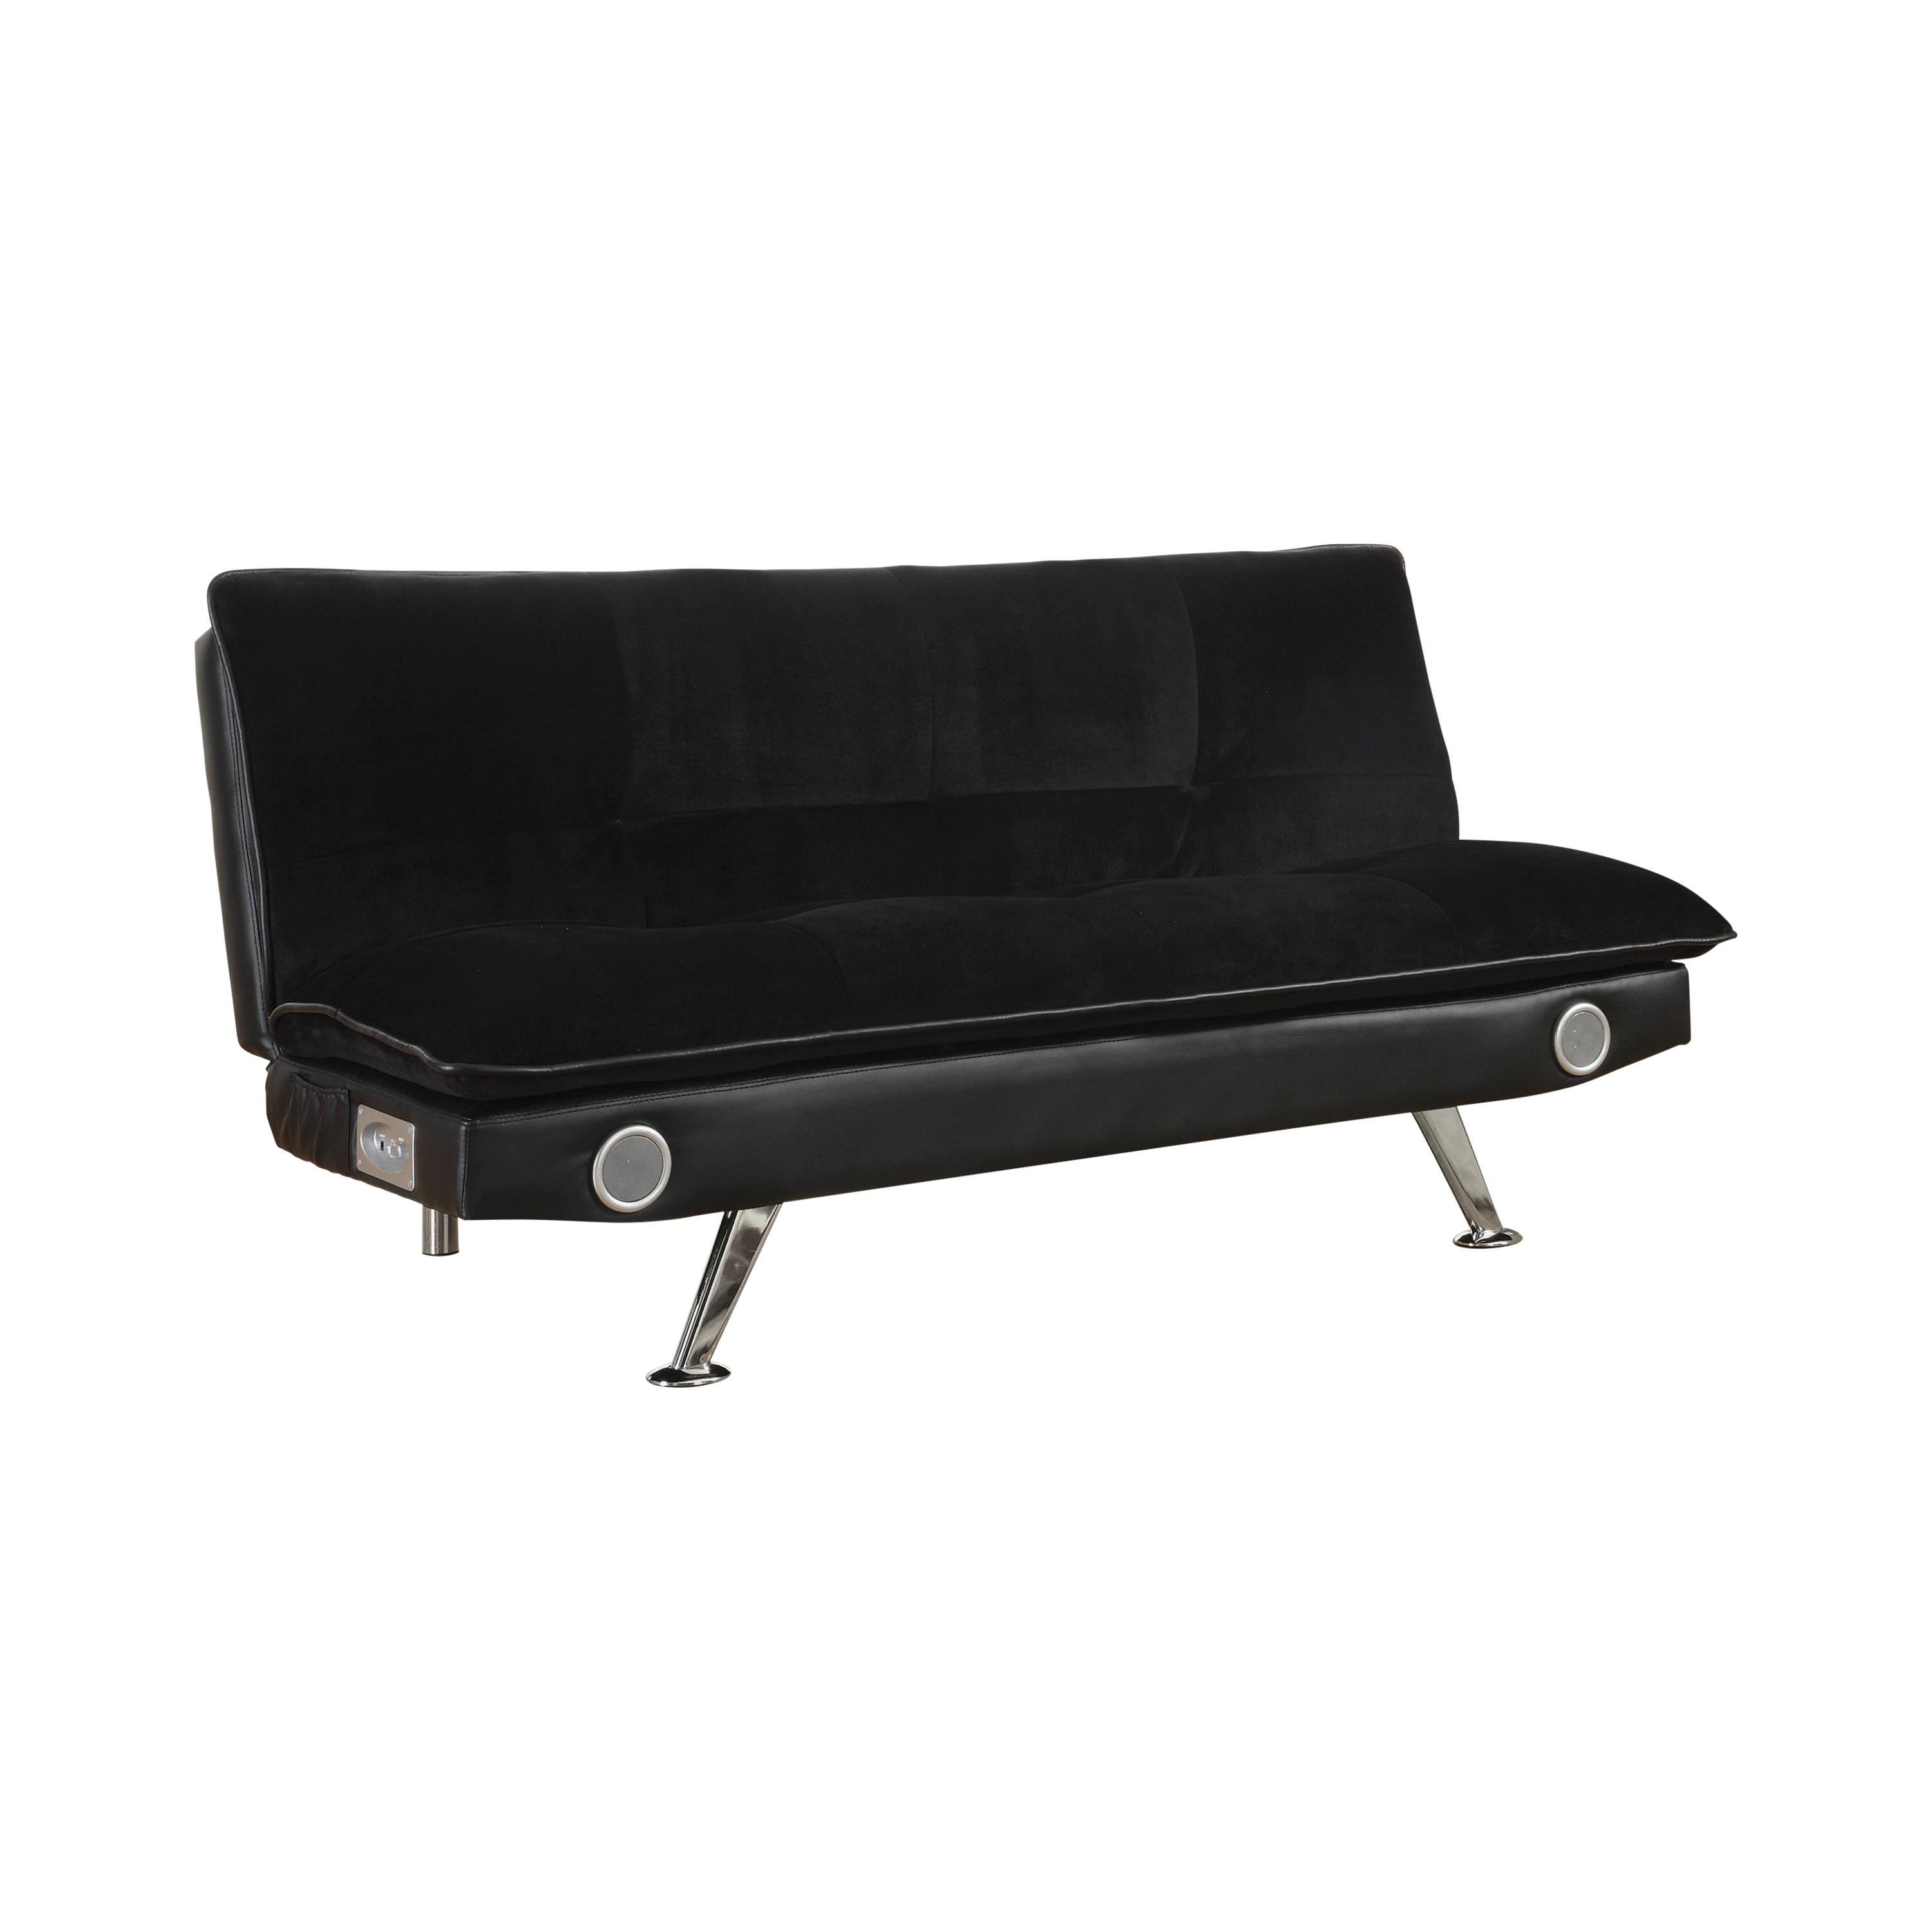 Contemporary Sofa bed 500187 Odel 500187 in Black Leatherette